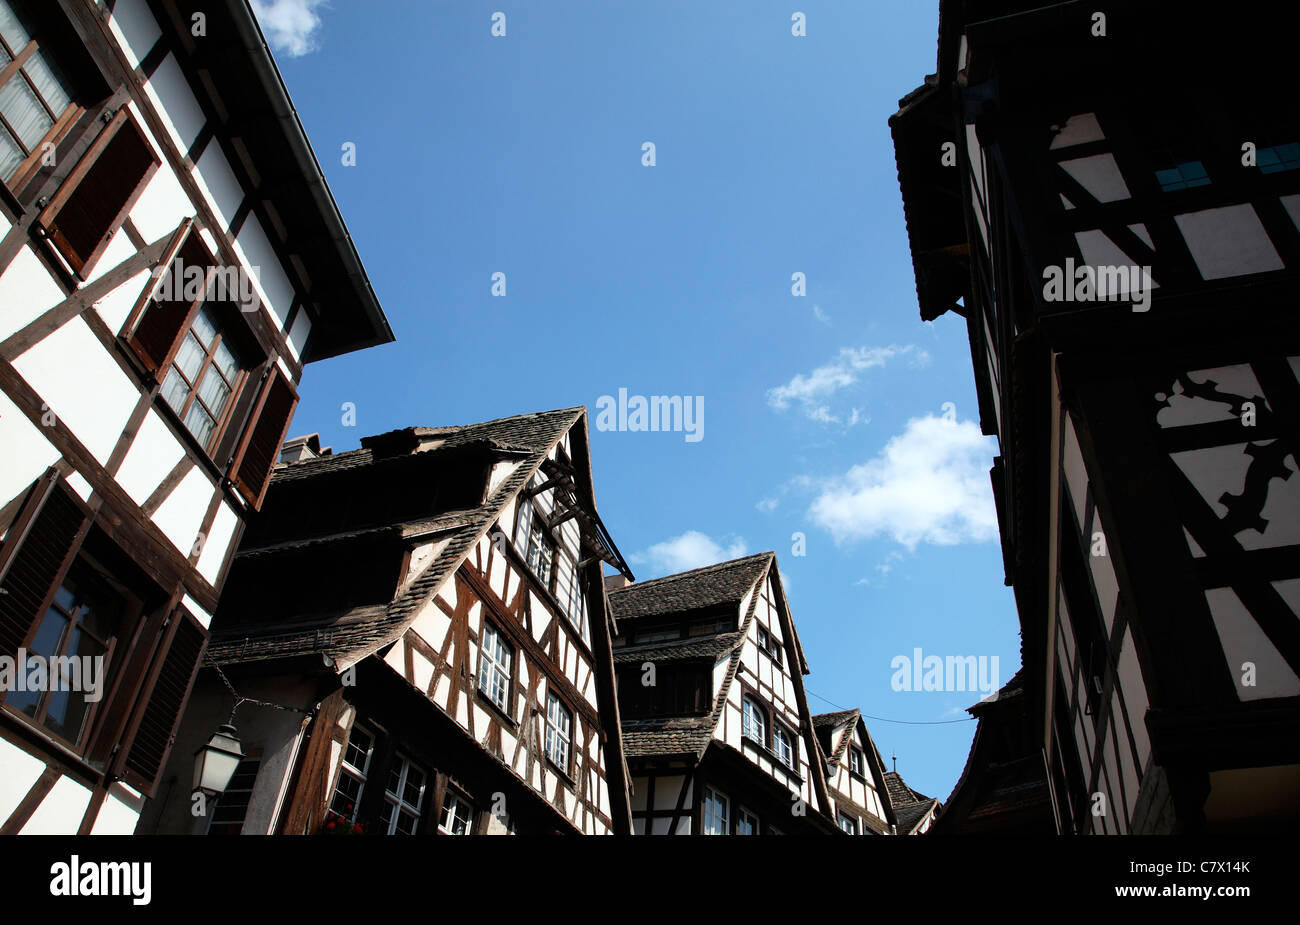 France Strasbourg half-timbered buildings Stock Photo